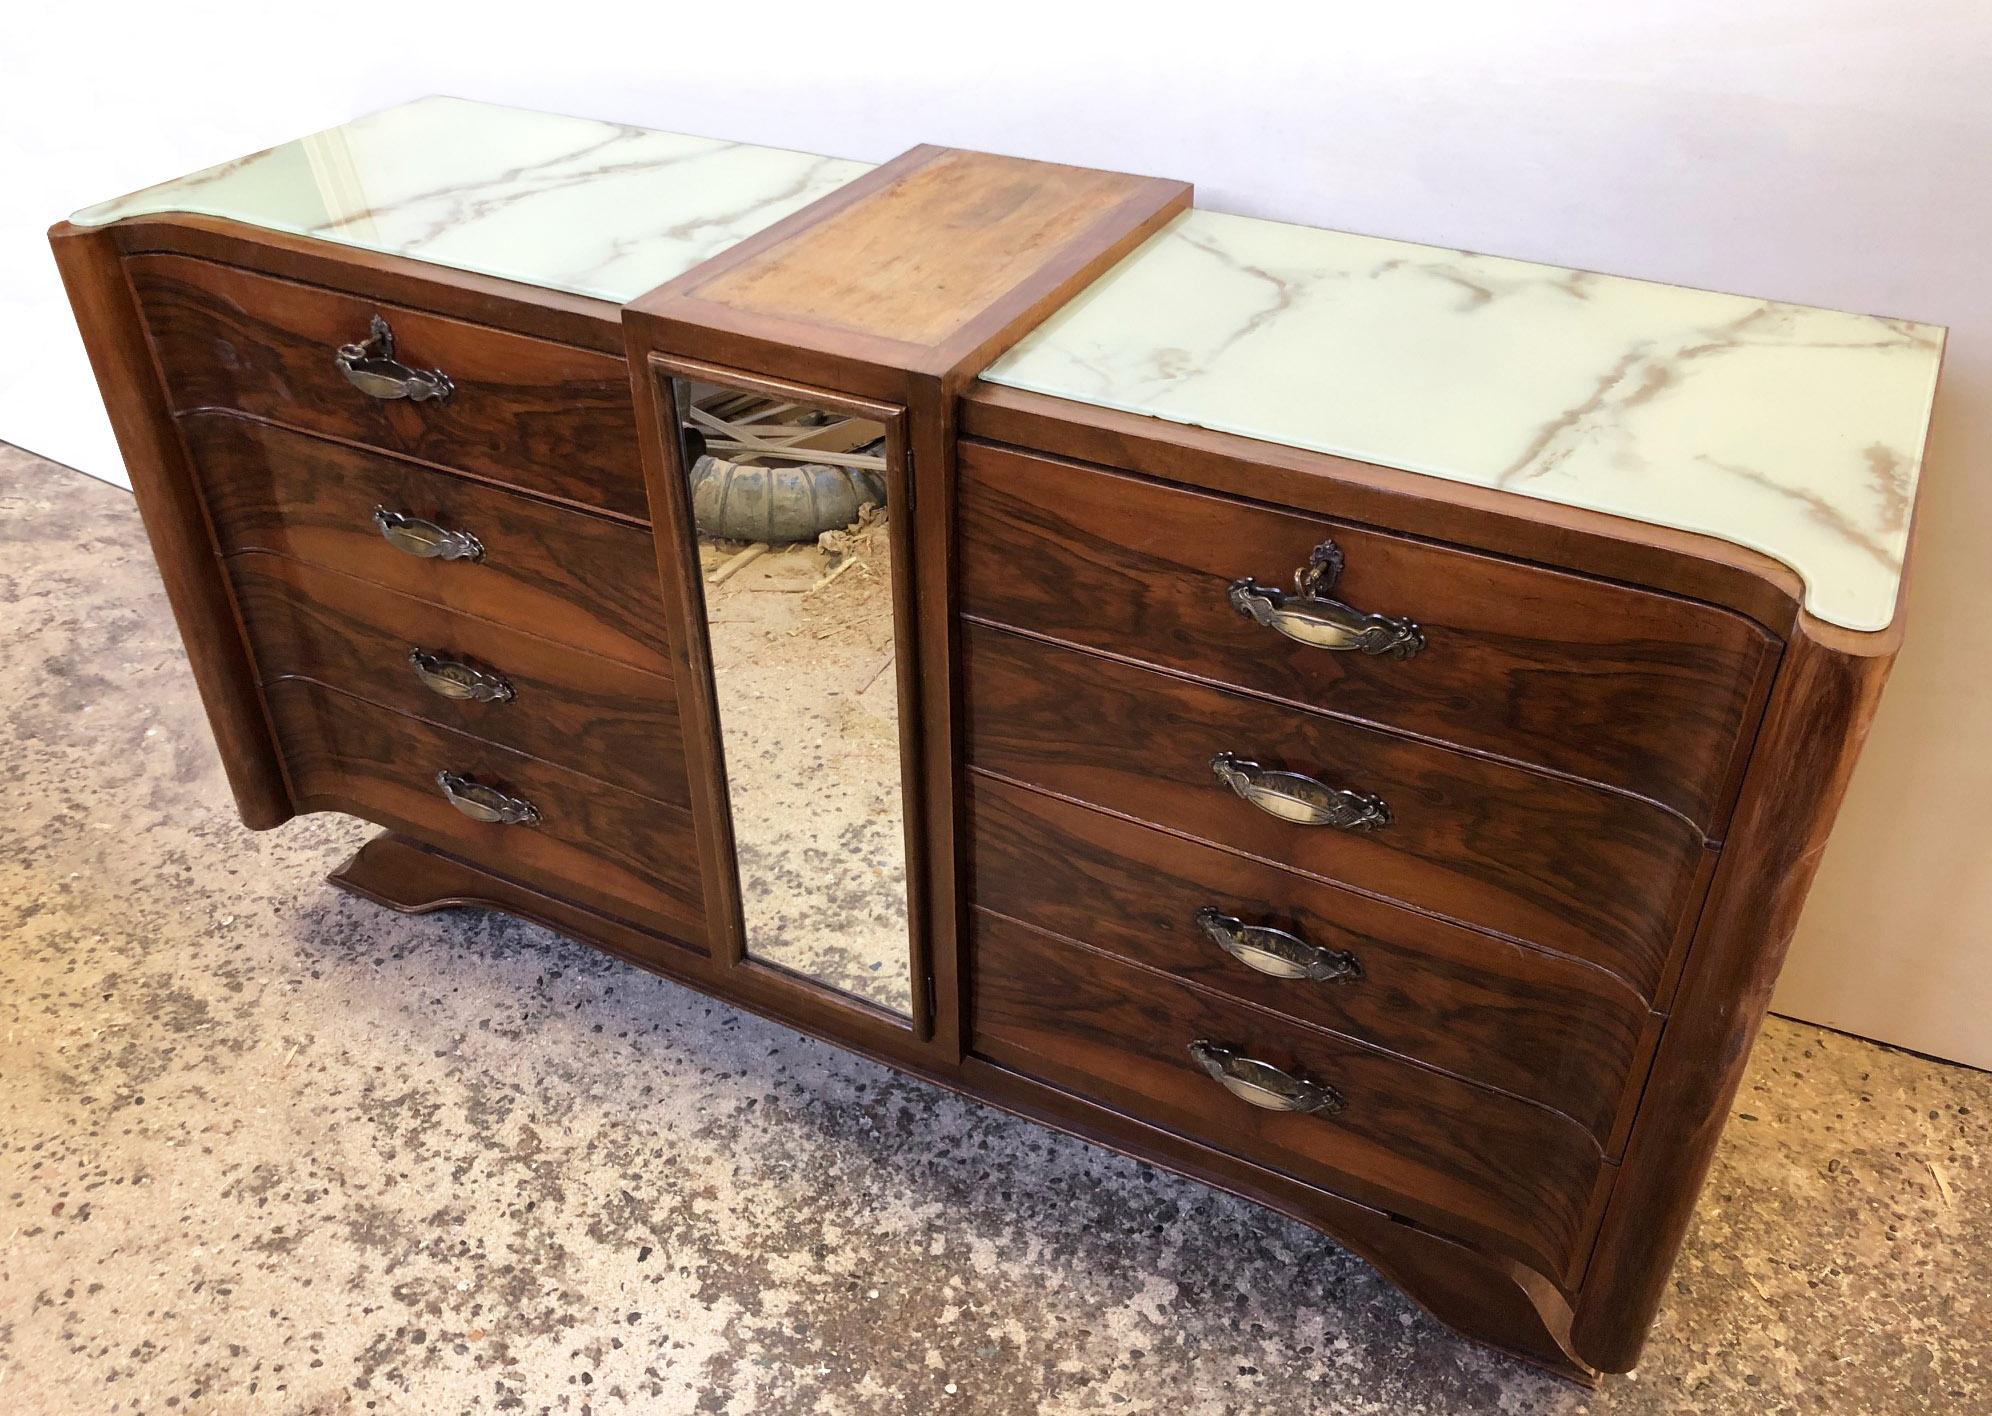 Mid-20th Century Italian Walnut Sideboard, Original from 1950 with 8 Drawers, Special Design